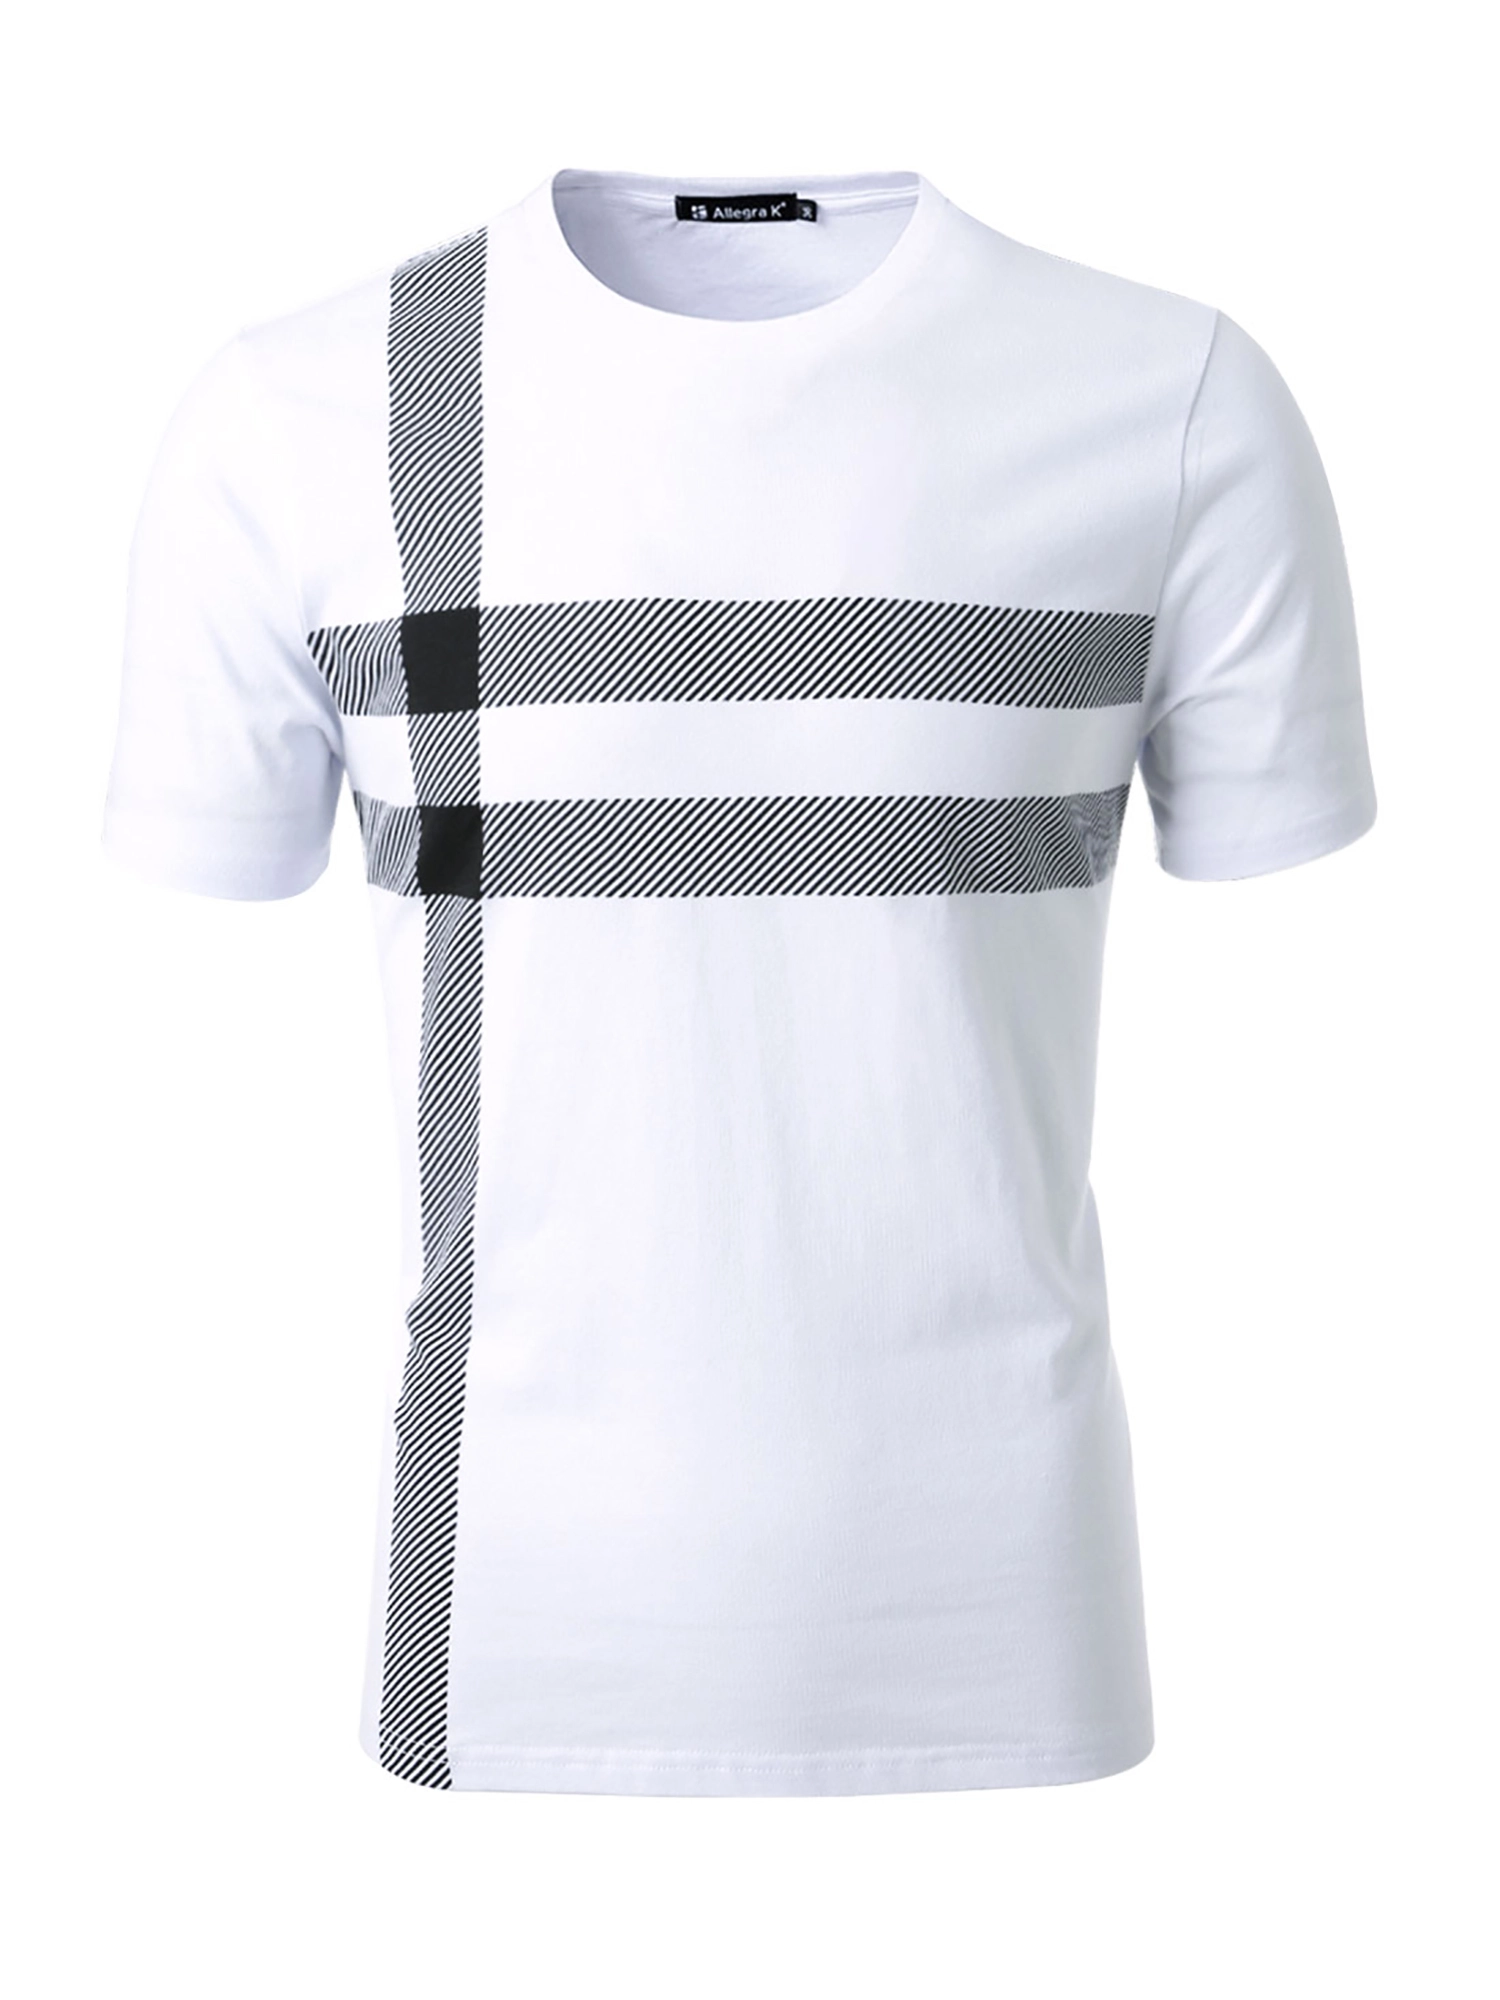 Men's Short Sleeves Crew Neck Striped Checked Tee Shirt